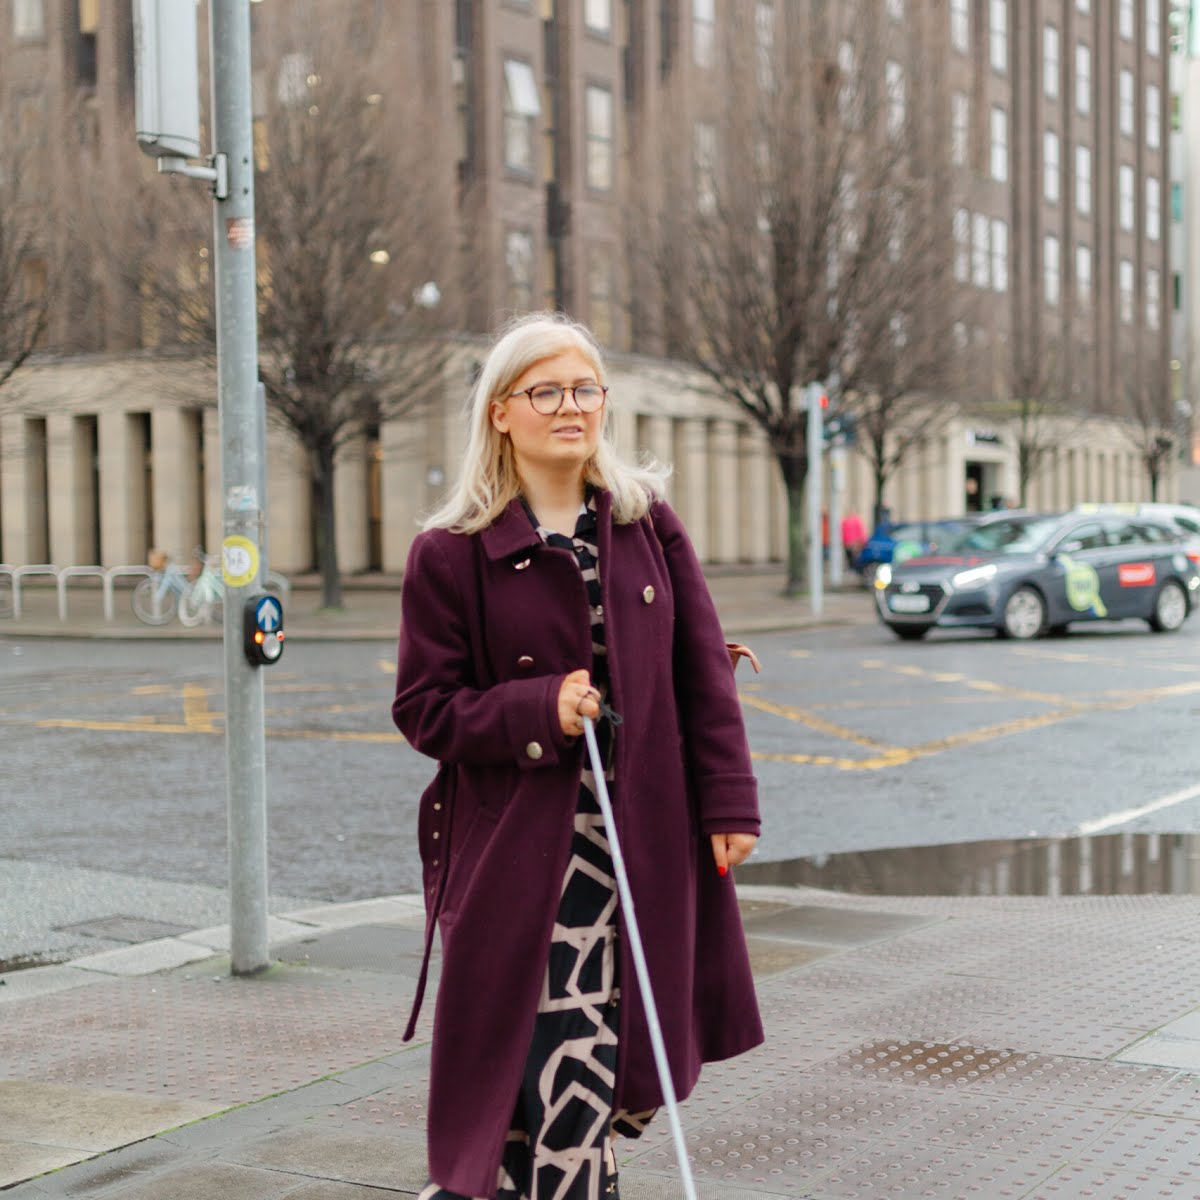 Niamh Donnelly uses her symbol cane as she walks down the road.